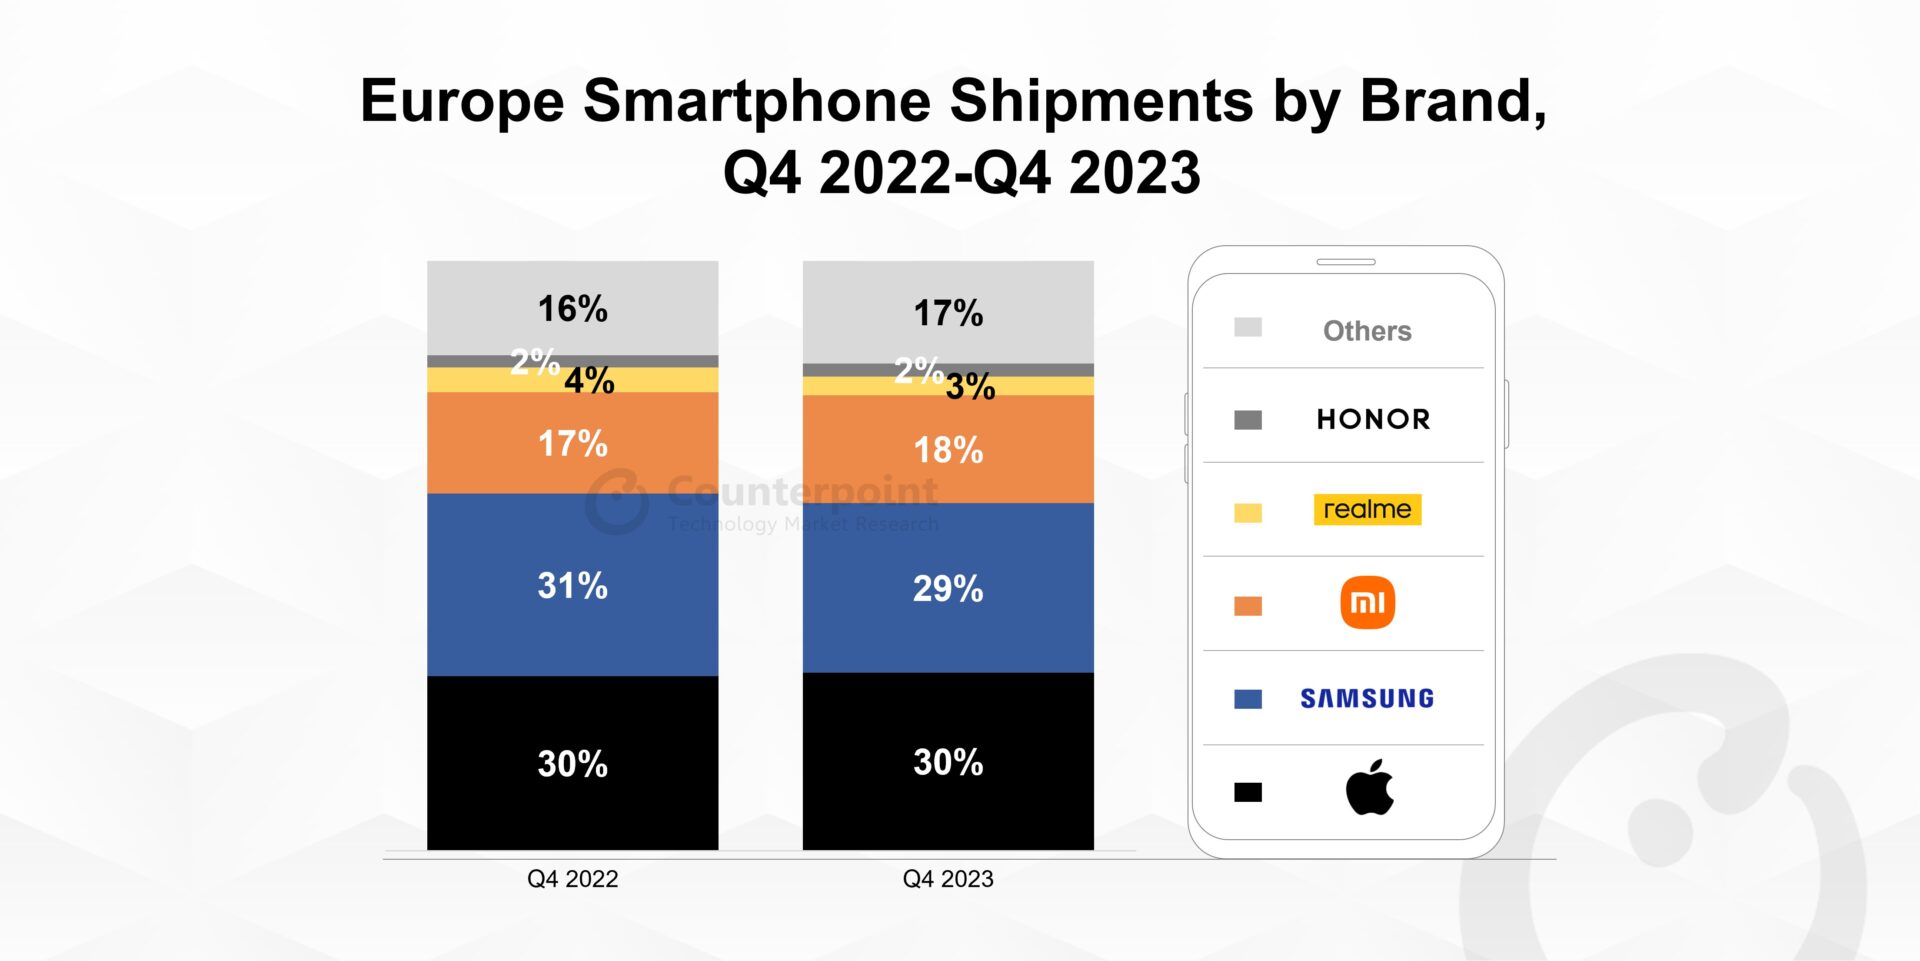 Europe Smartphone Shipments Down 3% YoY in Q4 2023, Signs of Recovery Ahead